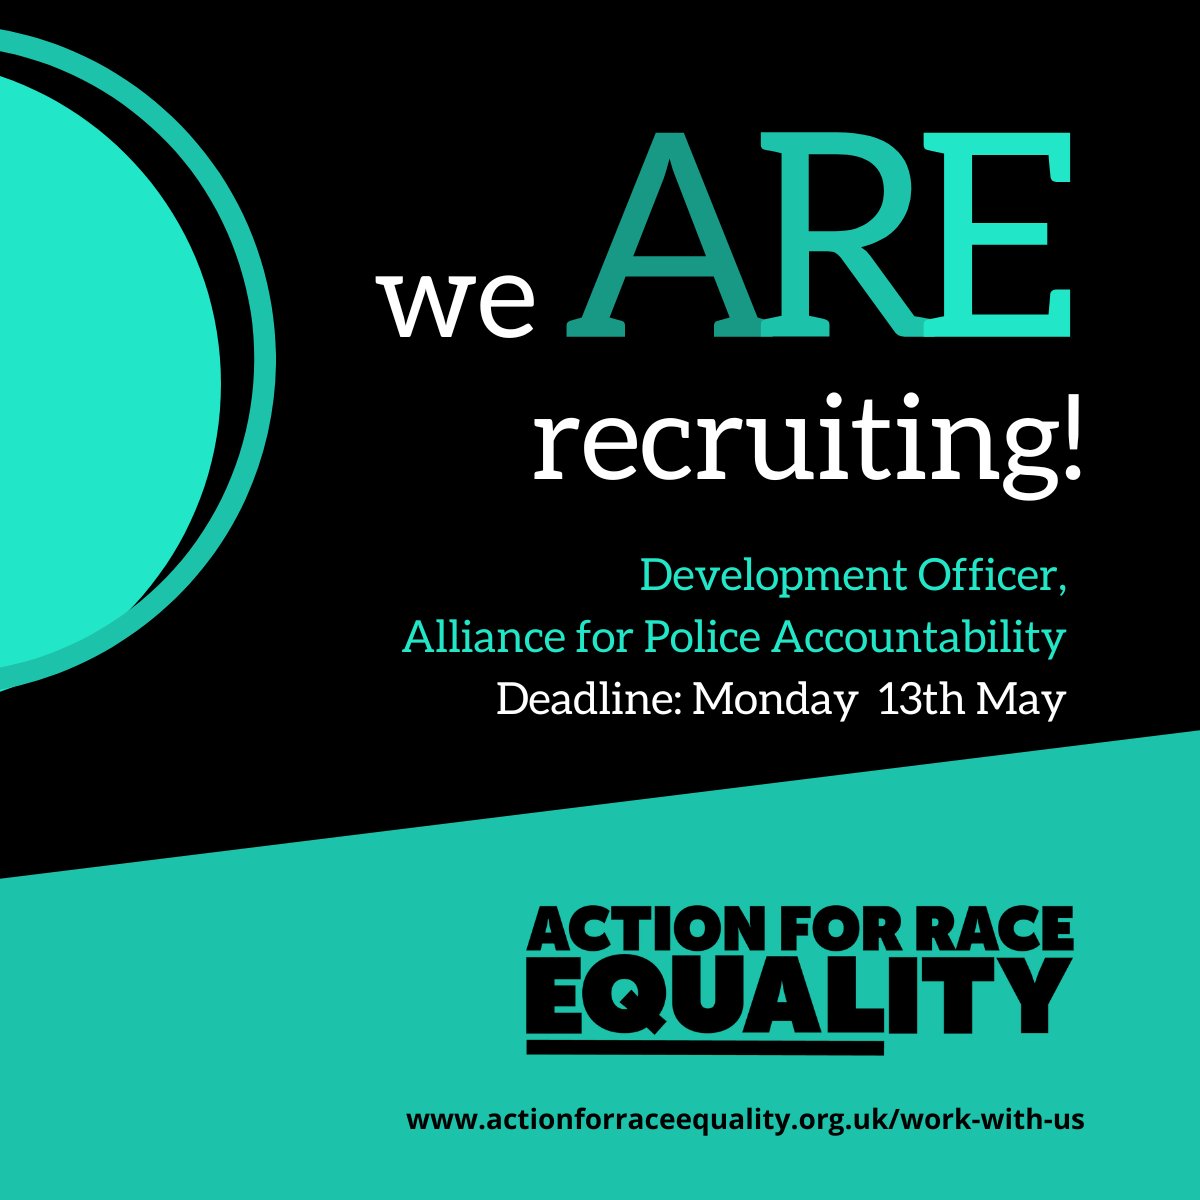 Ready to join a team dedicated to making a difference? We're hiring a Development Officer to transform police relationships and develop community-led strategies for violence reduction through @apavoices ow.ly/R1kH50RszB5 #opportunityalert